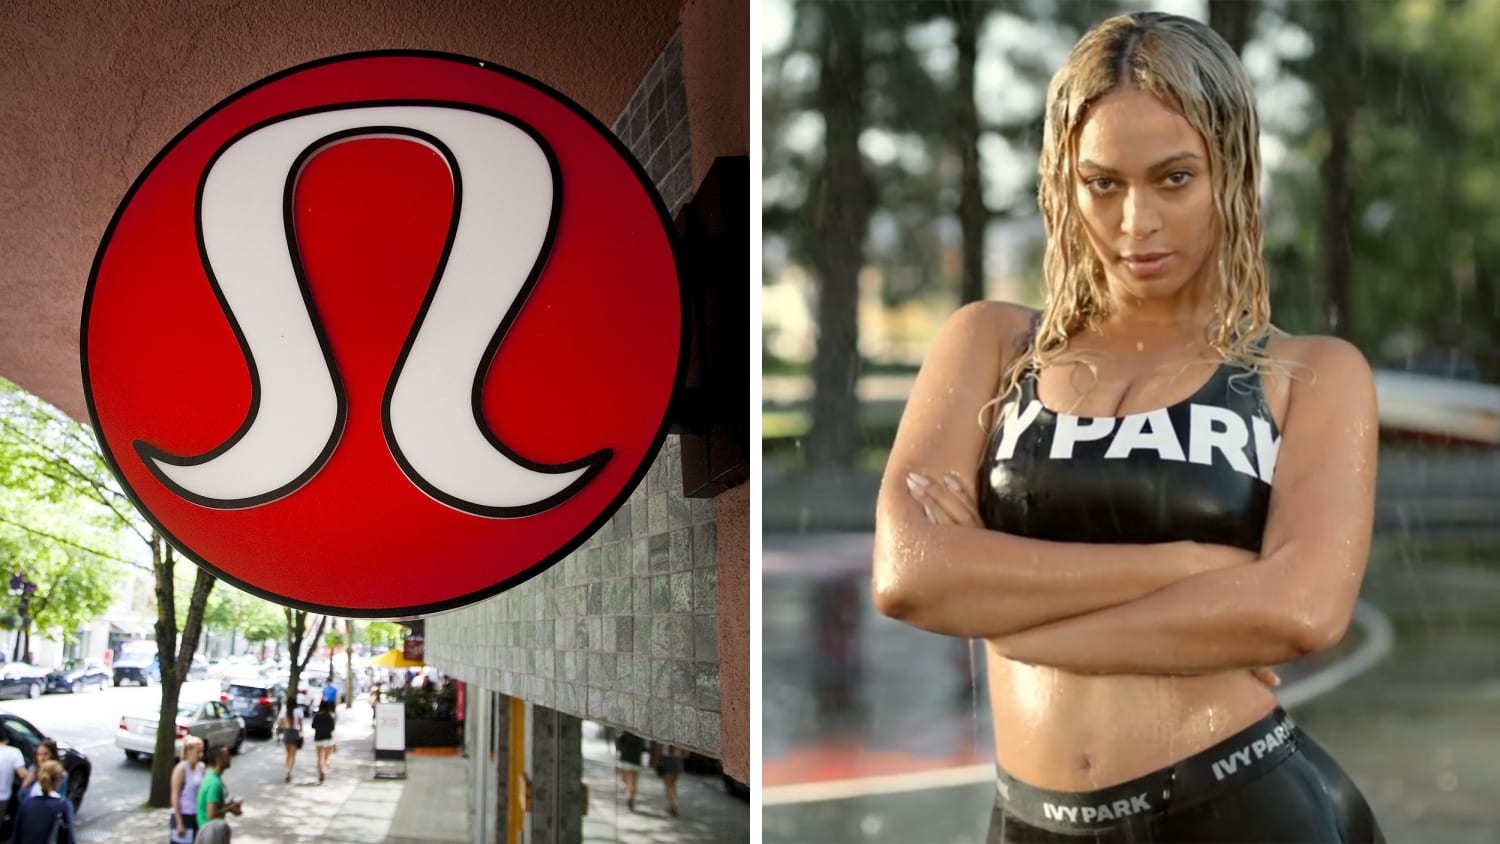 Lululemon accuses Beyonce of imitation with her Ivy Park workout line - TODAY.com